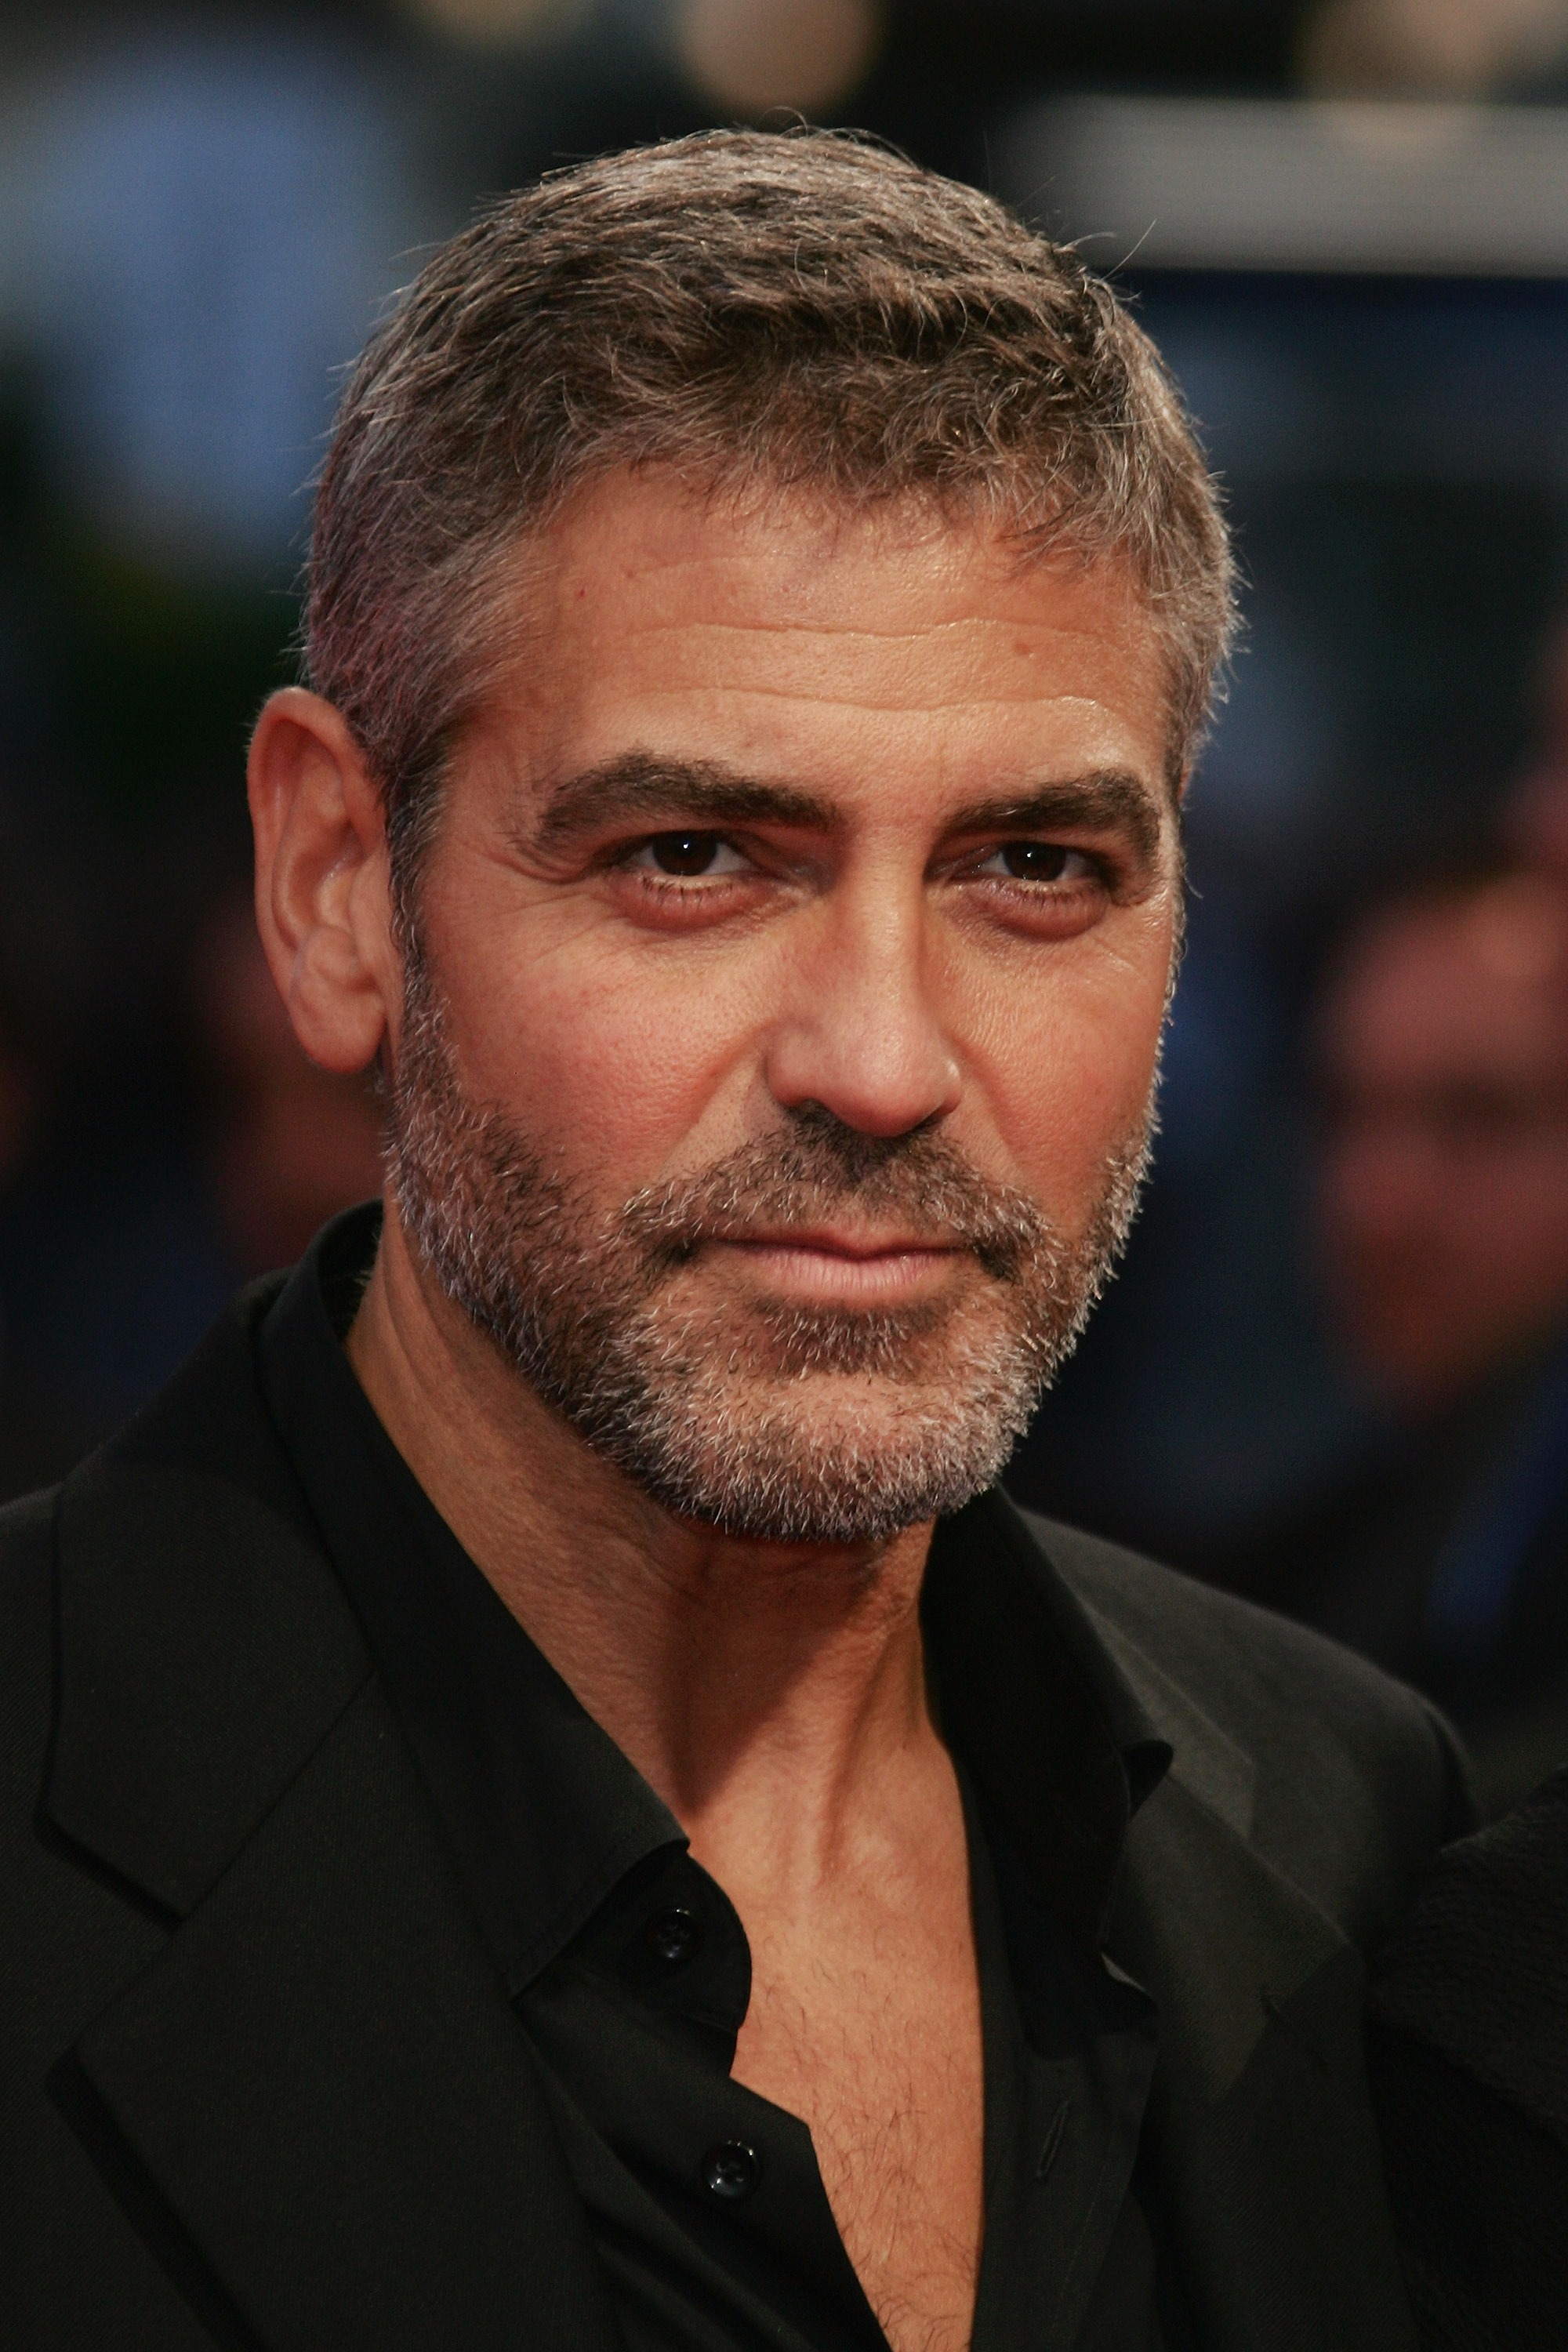 George Clooney attends the premiere of Michael Clayton during the 33rd Deauville American Film Festival, on September 2, 2007, in Deauville, France. | Source: Getty Images